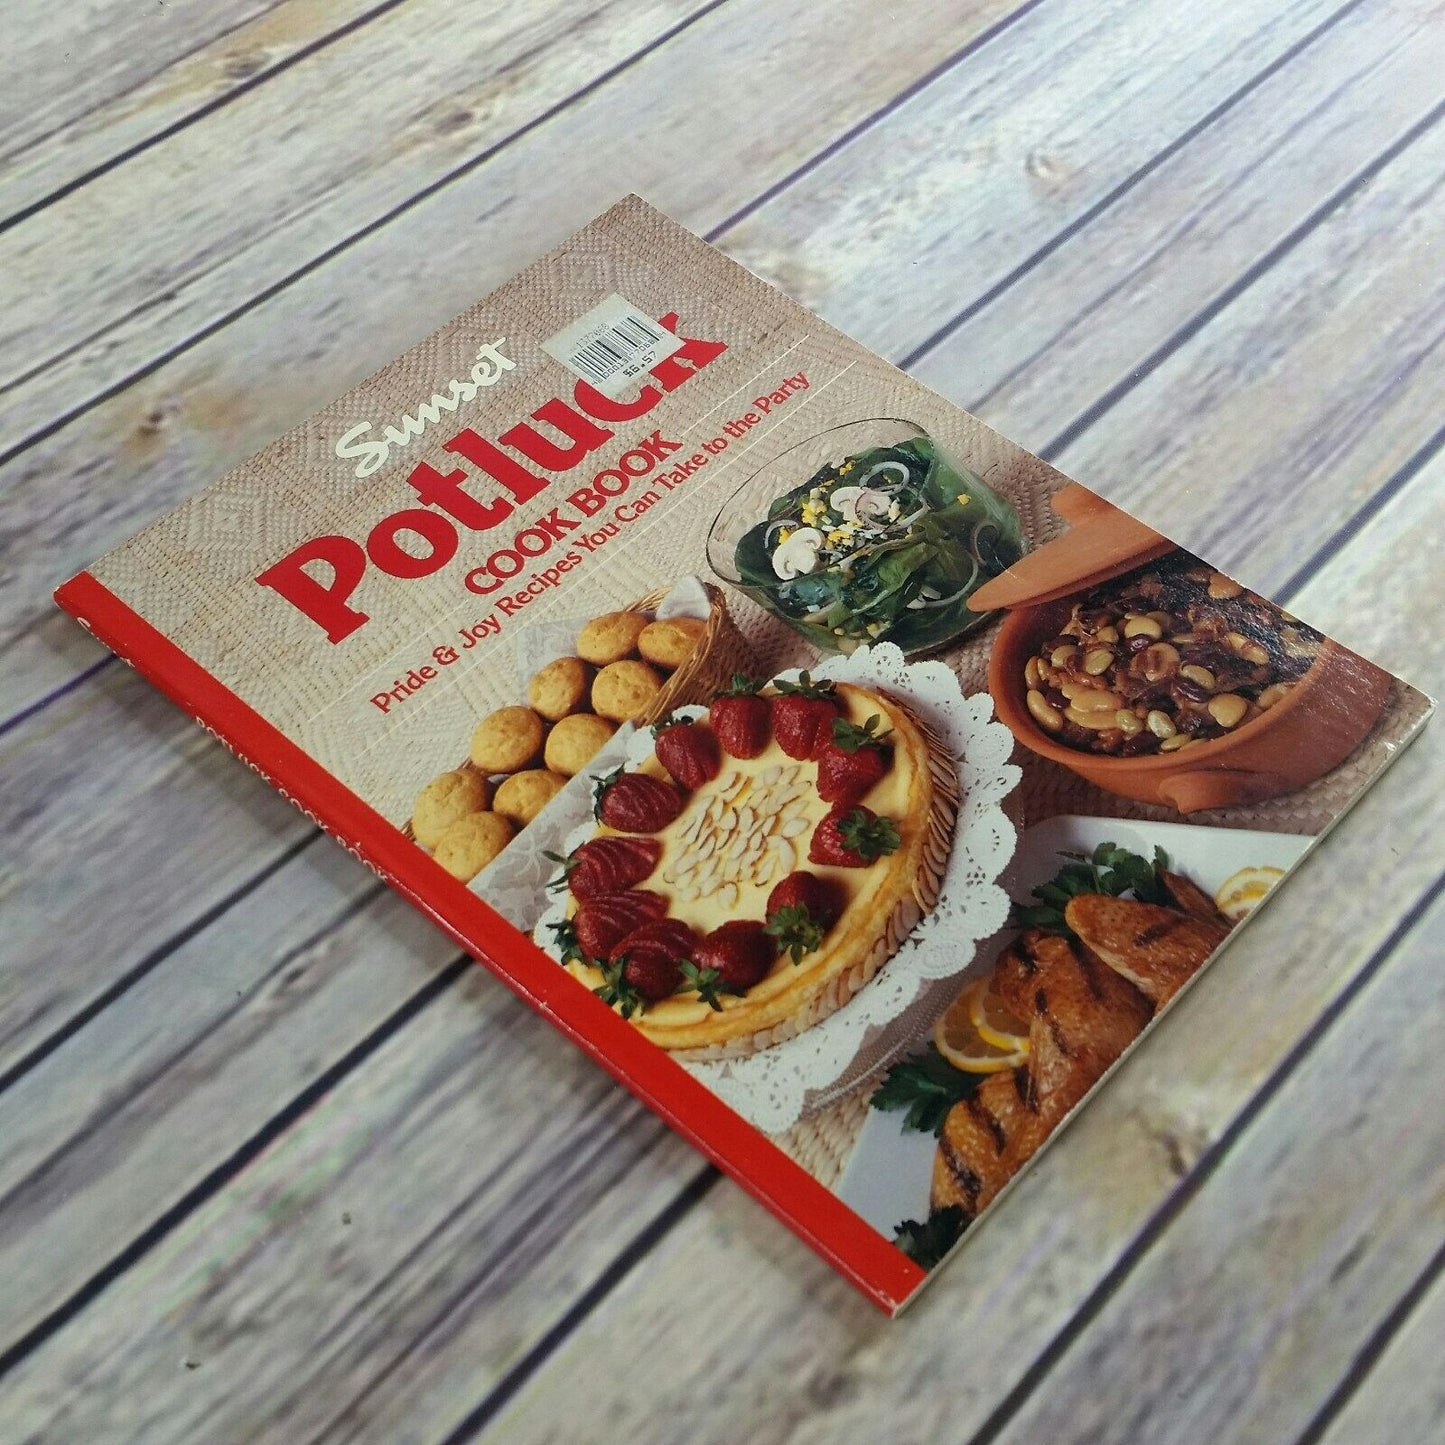 Vintage Cookbook Sunset Potluck Recipes 1991 Paperback Book Pride an Joy Recipes You Can Take to the Party